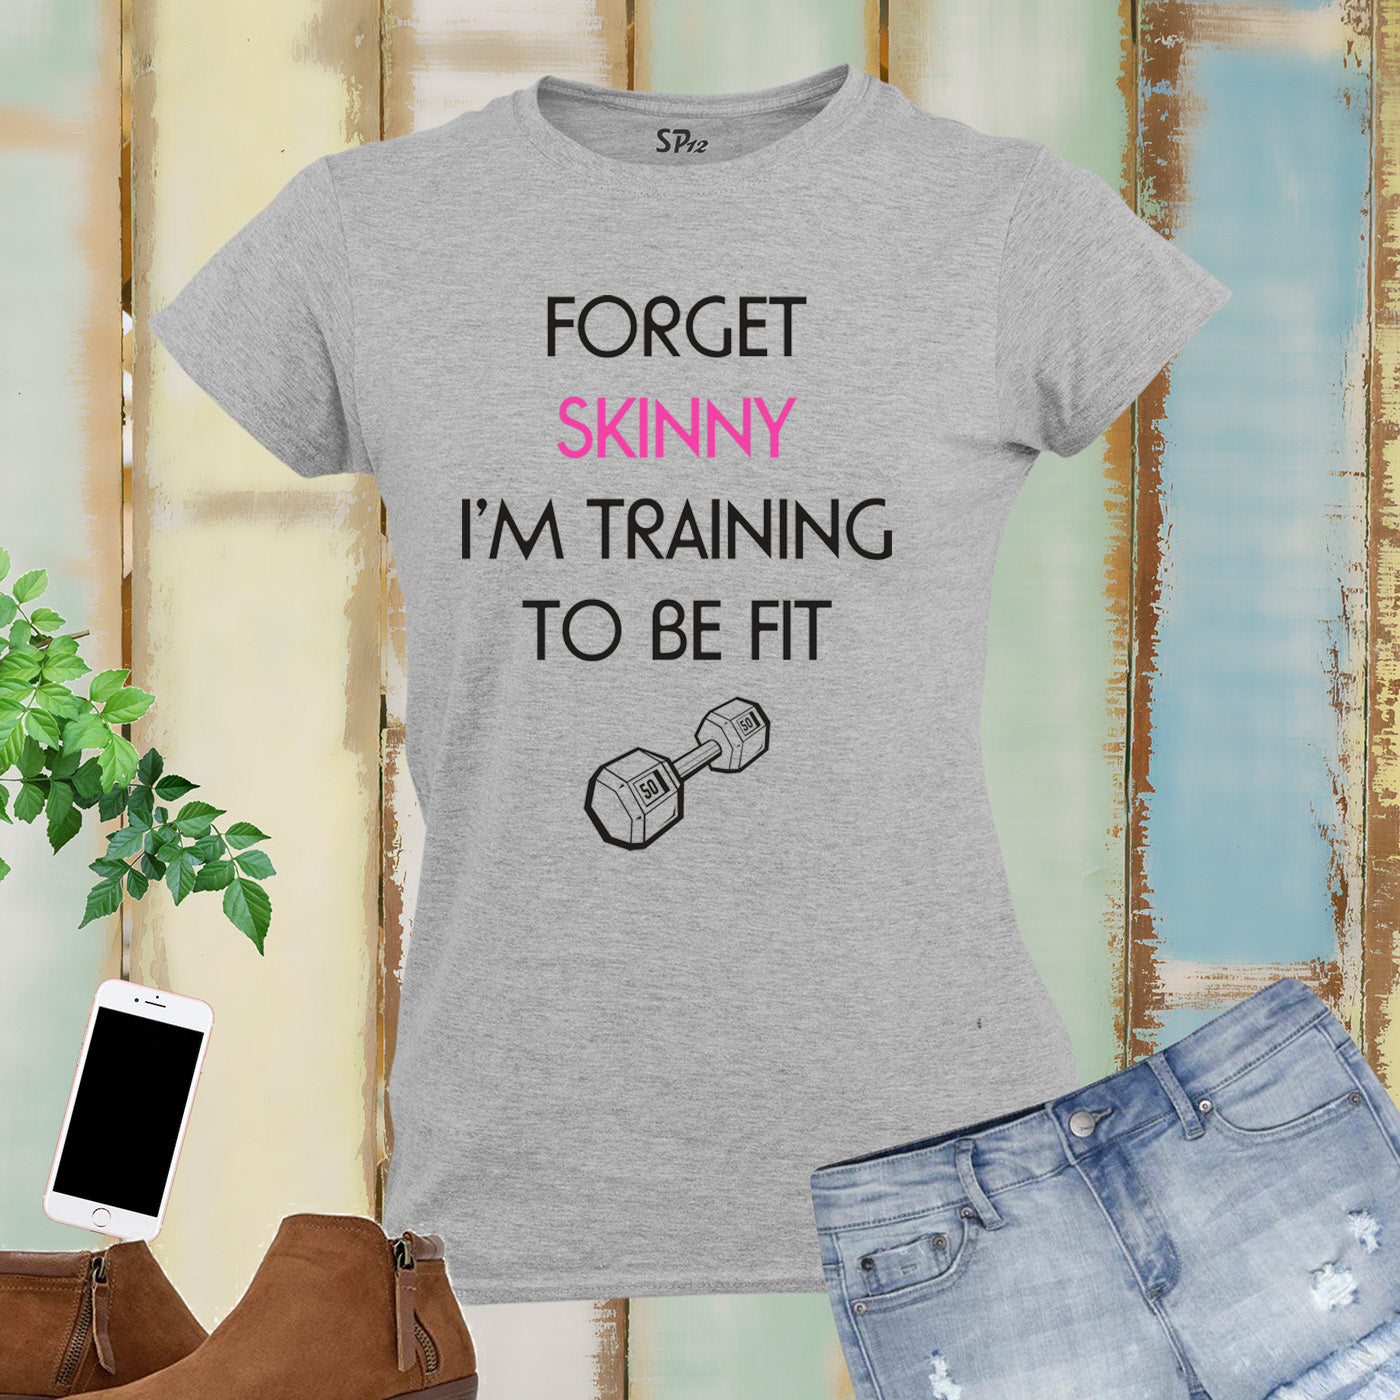 Be Fit Personal Training crossfit Women T Shirt